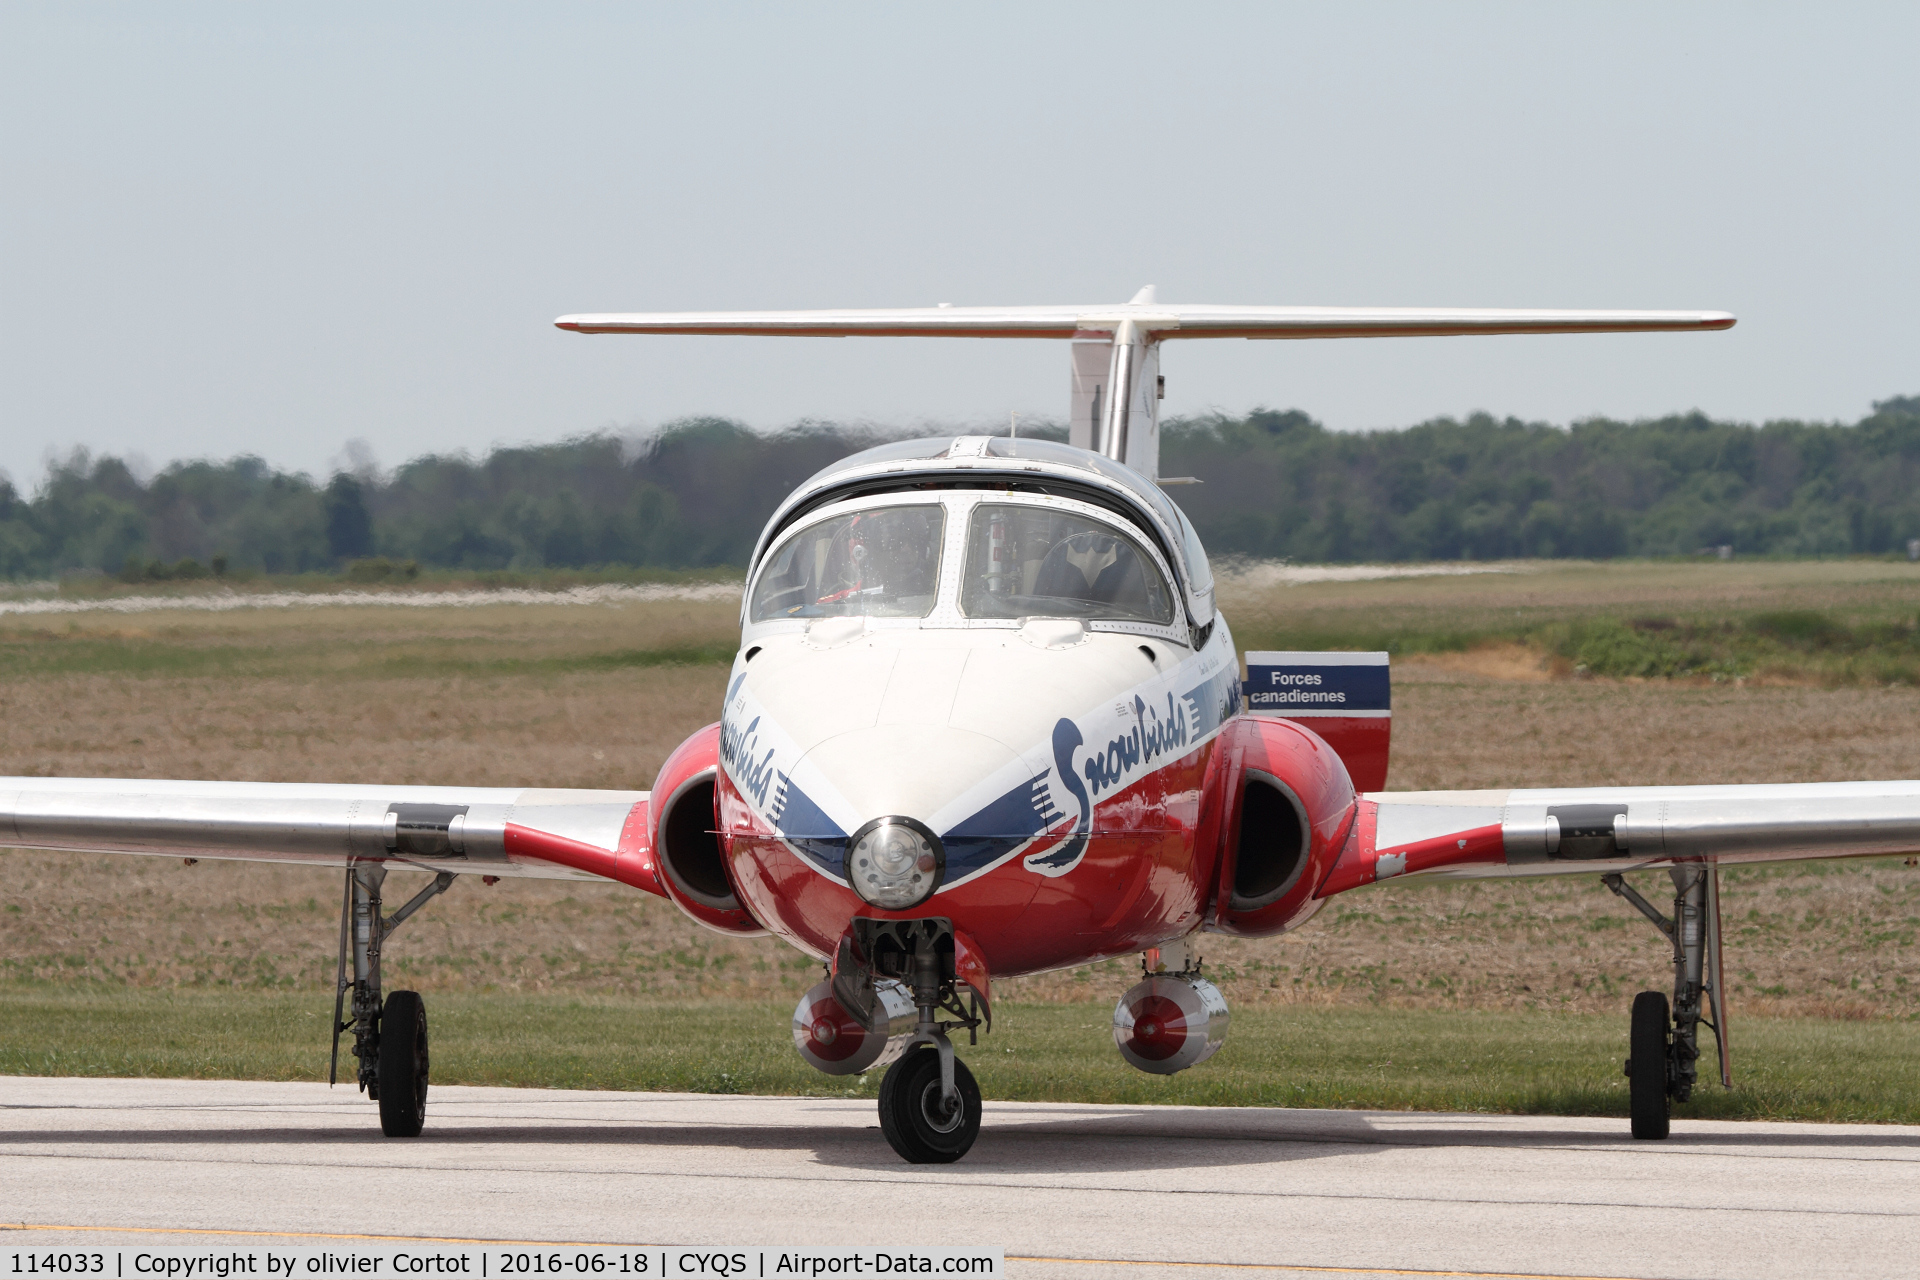 114033, Canadair CT-114 Tutor C/N 1033, front view, 2016